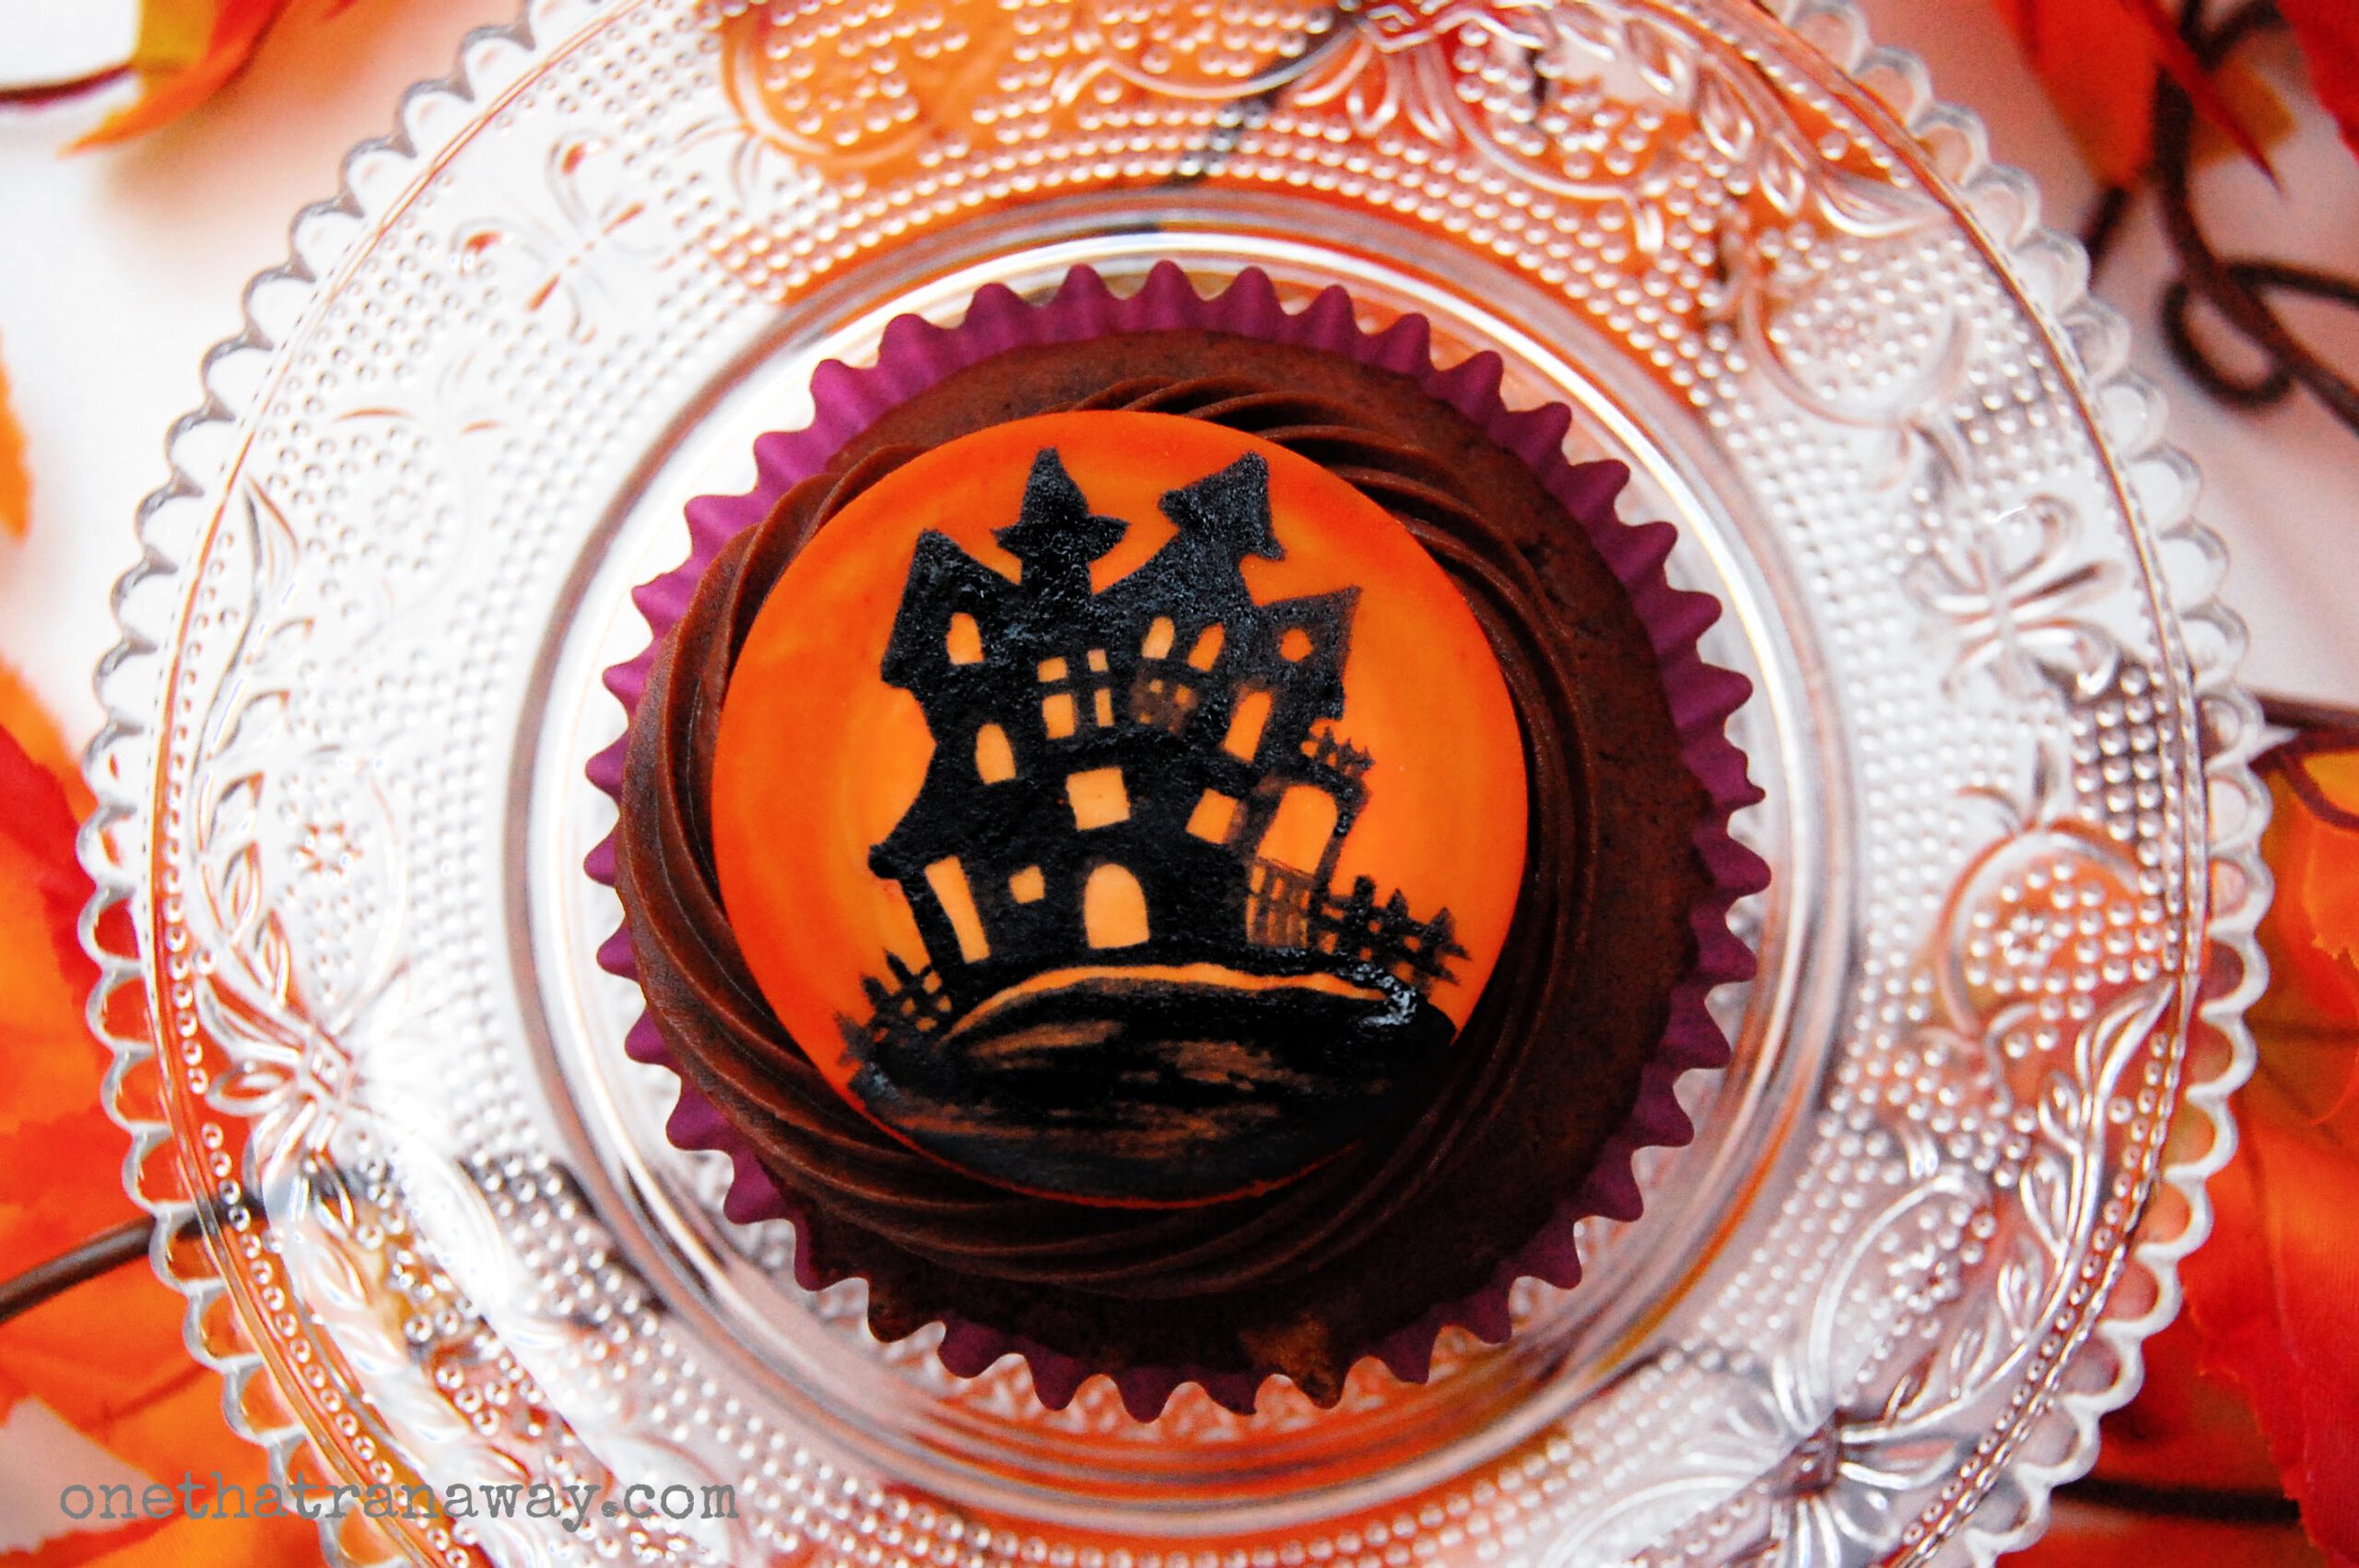 chocolate cupcake with an orange fondant topper showing the silhouette of a haunted house
